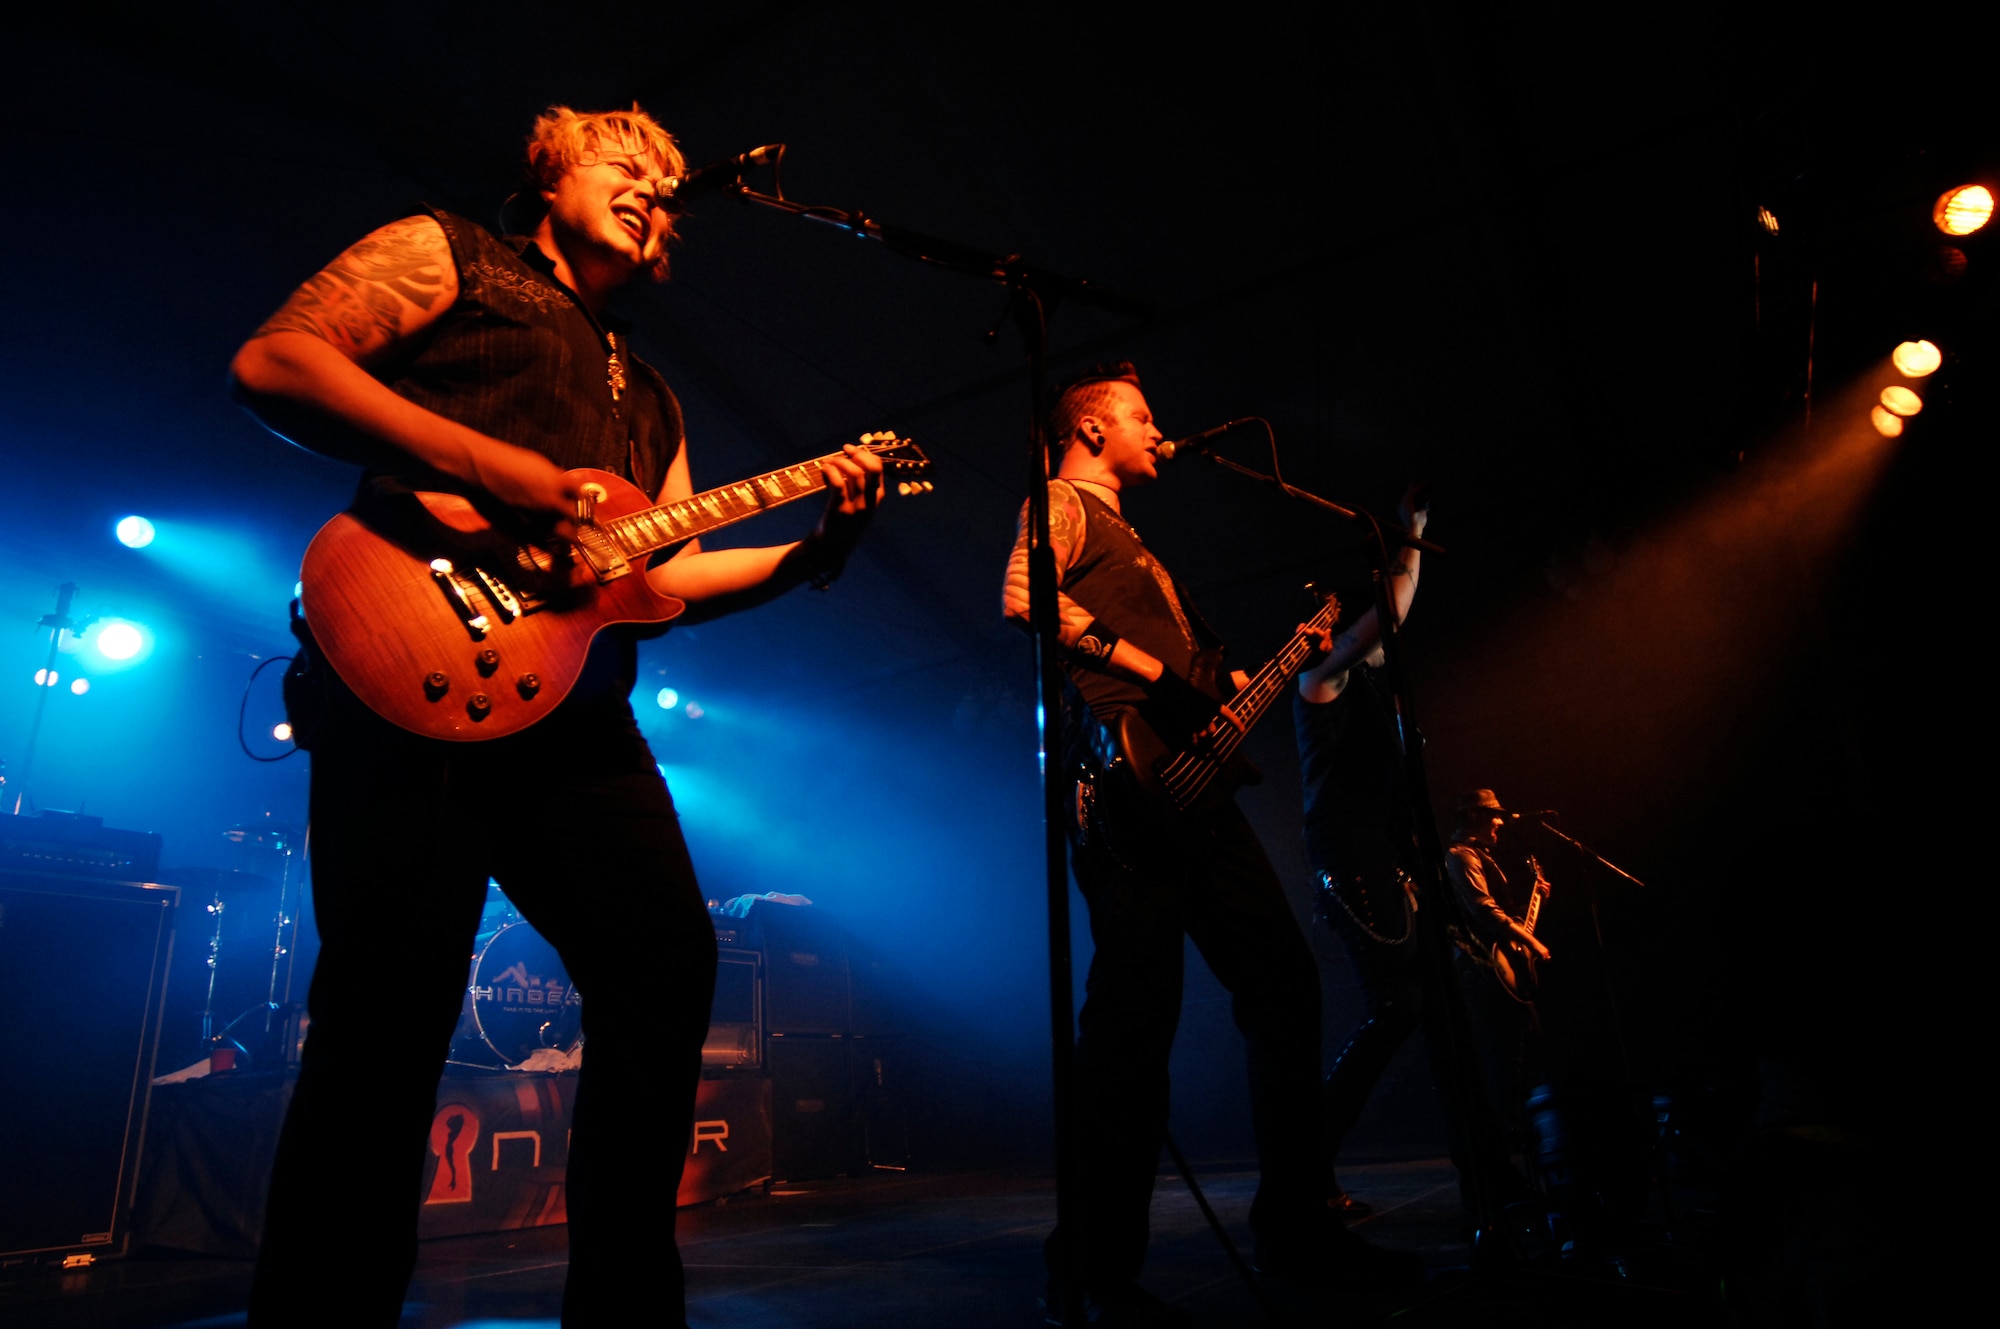 (left) Joe ‘Blower’ Garvey, lead guitarist for Hinder, and Mike Rodden, bass guitarist for Hinder, perform for servicemembers and their families, June 5, 2009, Ramstein Air Base, Germany. The Armed Forces Entertainment and Navy Entertainment indulged servicemembers overseas and at remote and isolated locations with entertainment to boost morale and welfare. (U.S. Air Force photo by Senior Airman Amber Bressler)